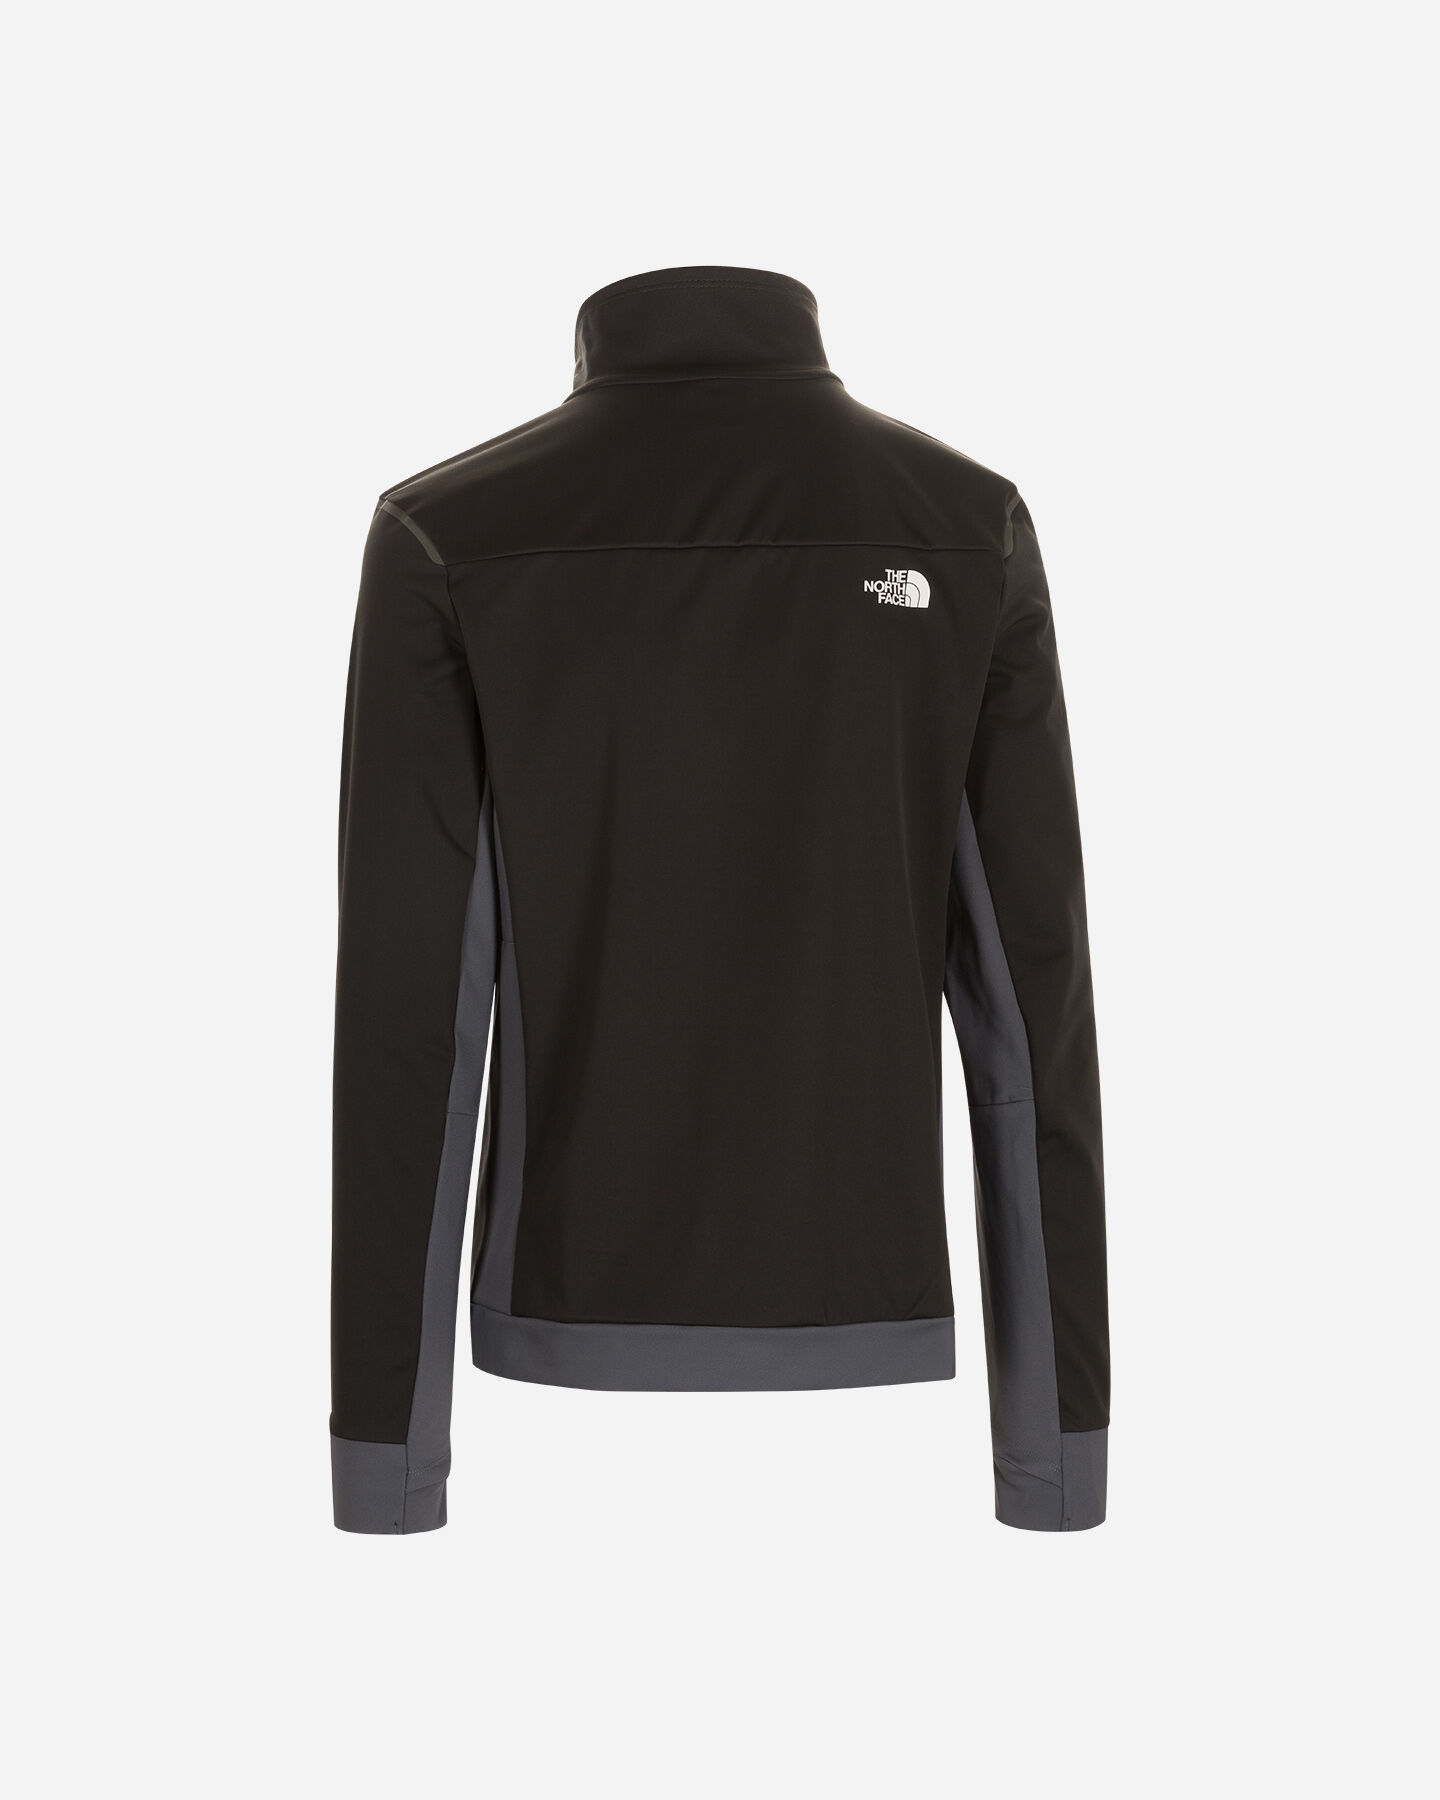  Pile THE NORTH FACE SPEEDTOUR FZ STRETCH M S5354823|5J6|S scatto 1